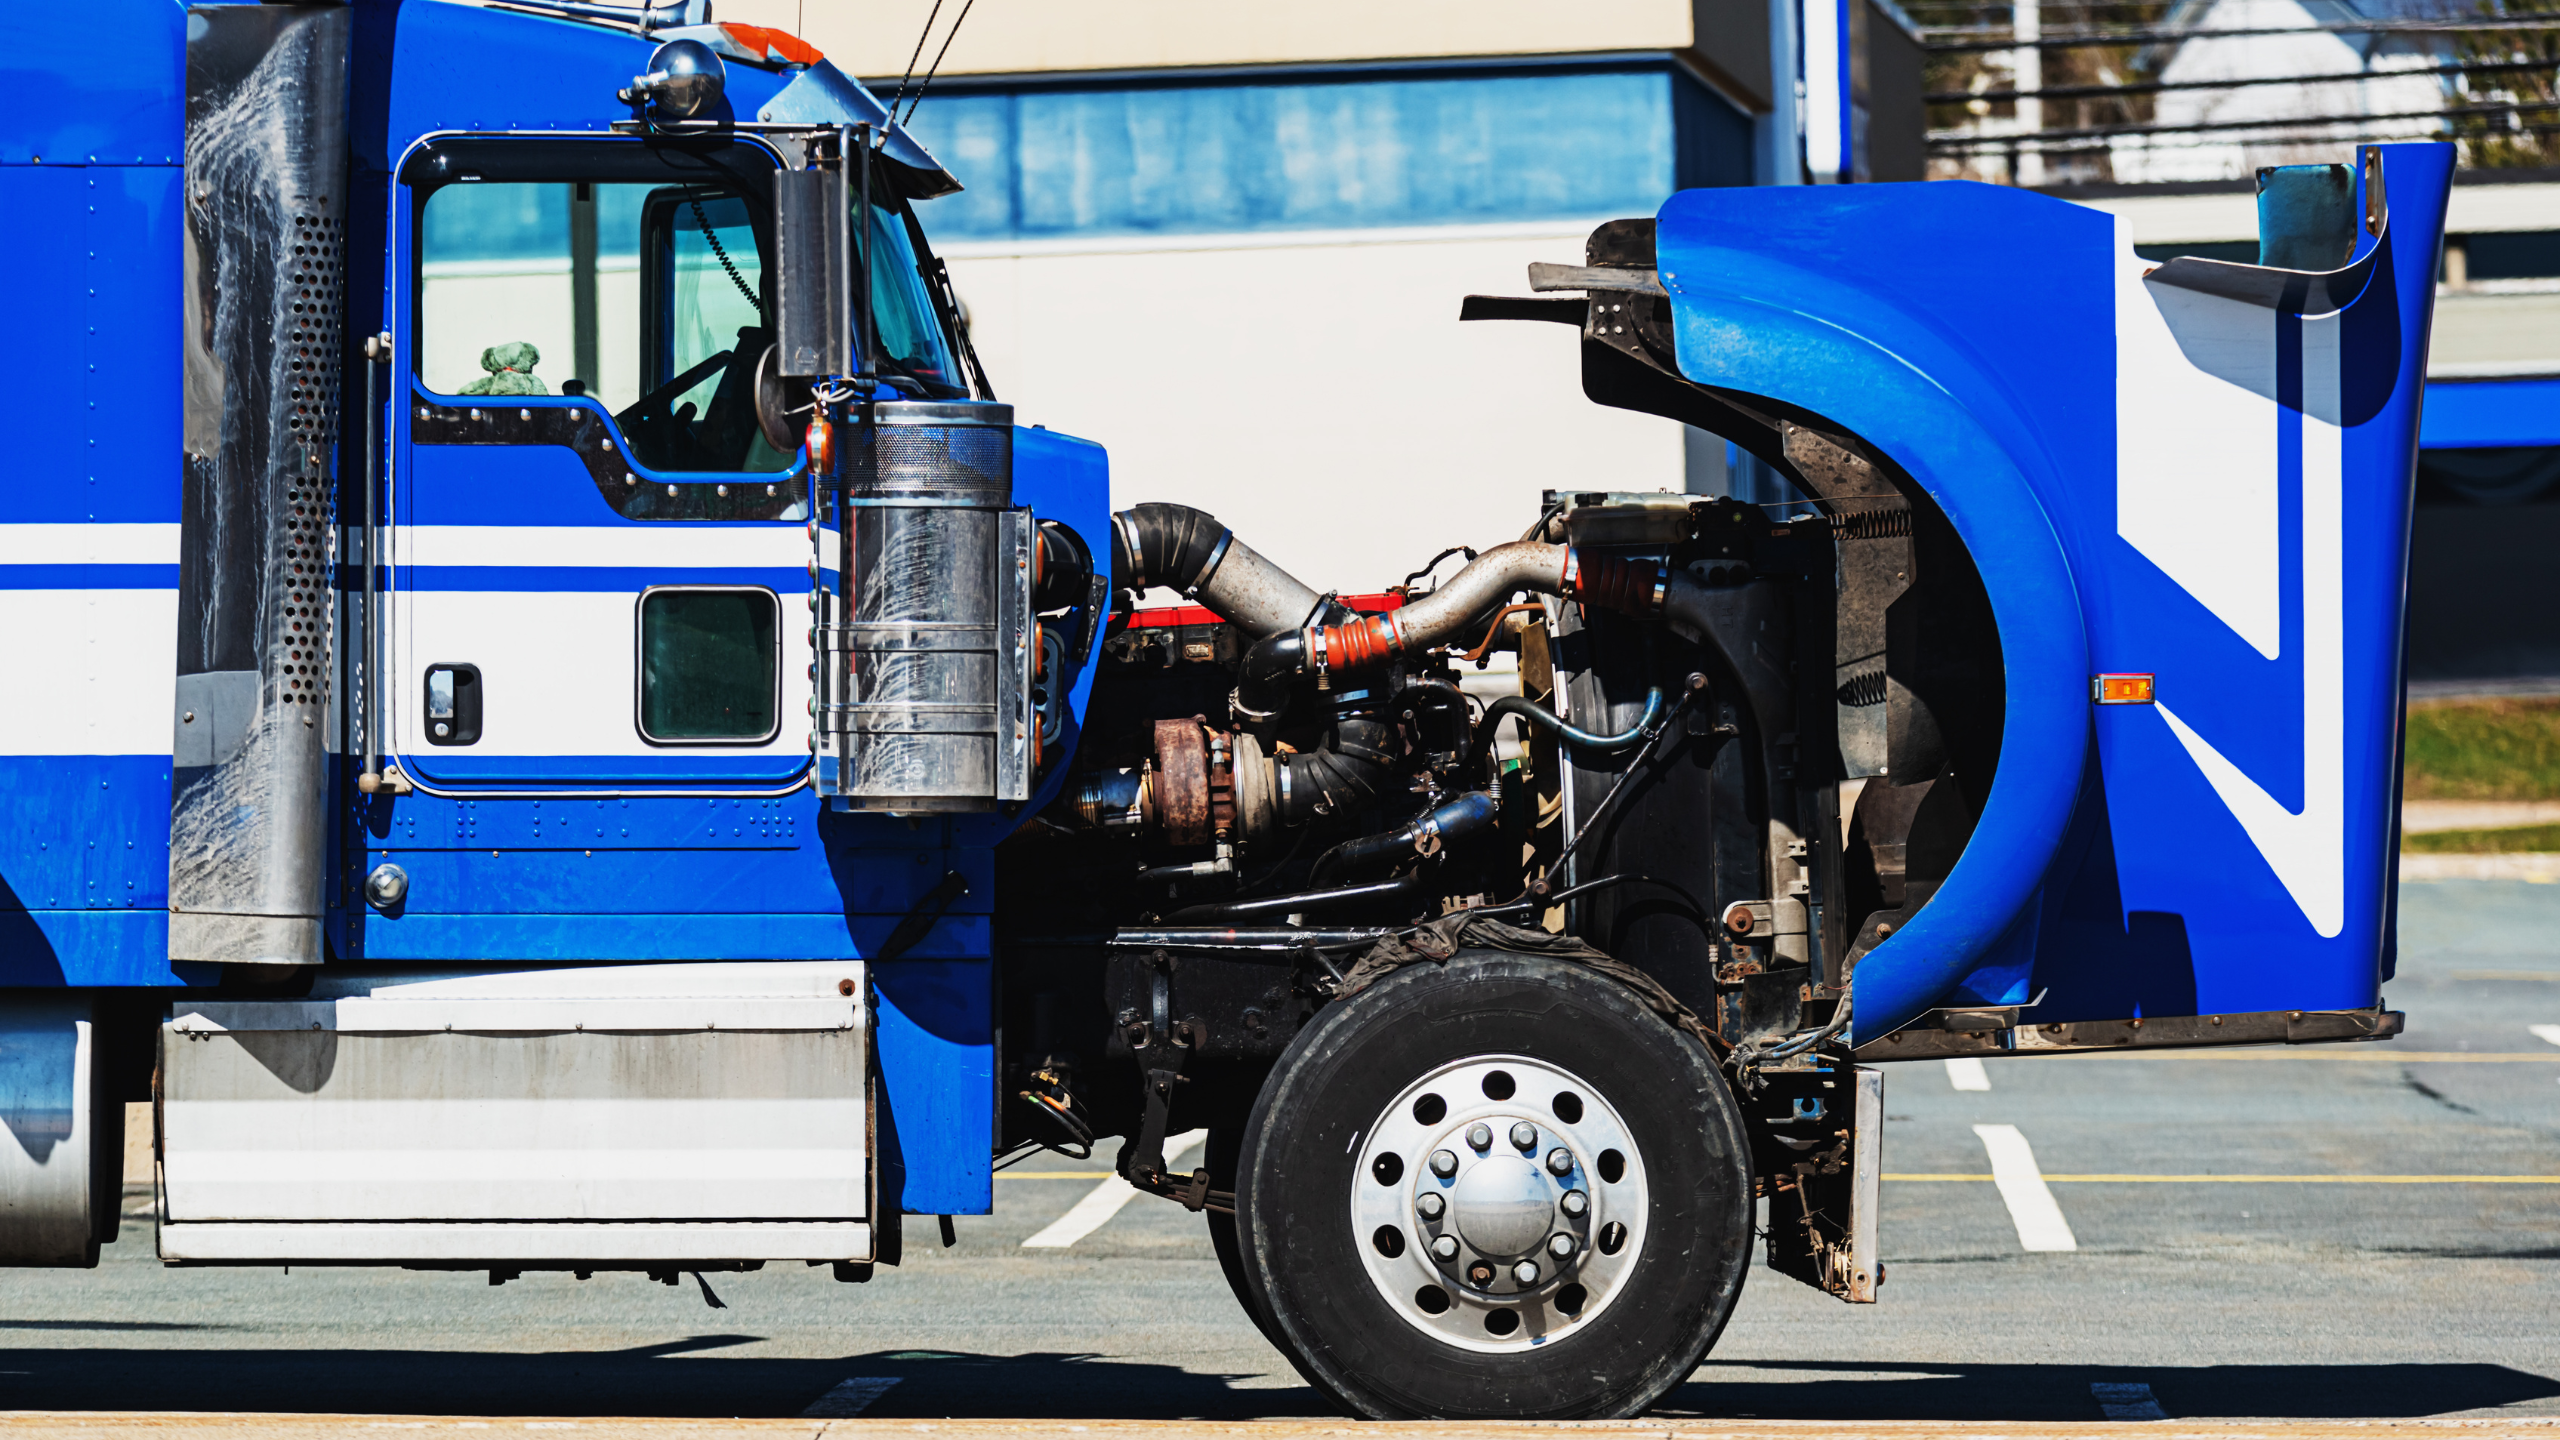 Blue Semi truck with the hood open for an inspection